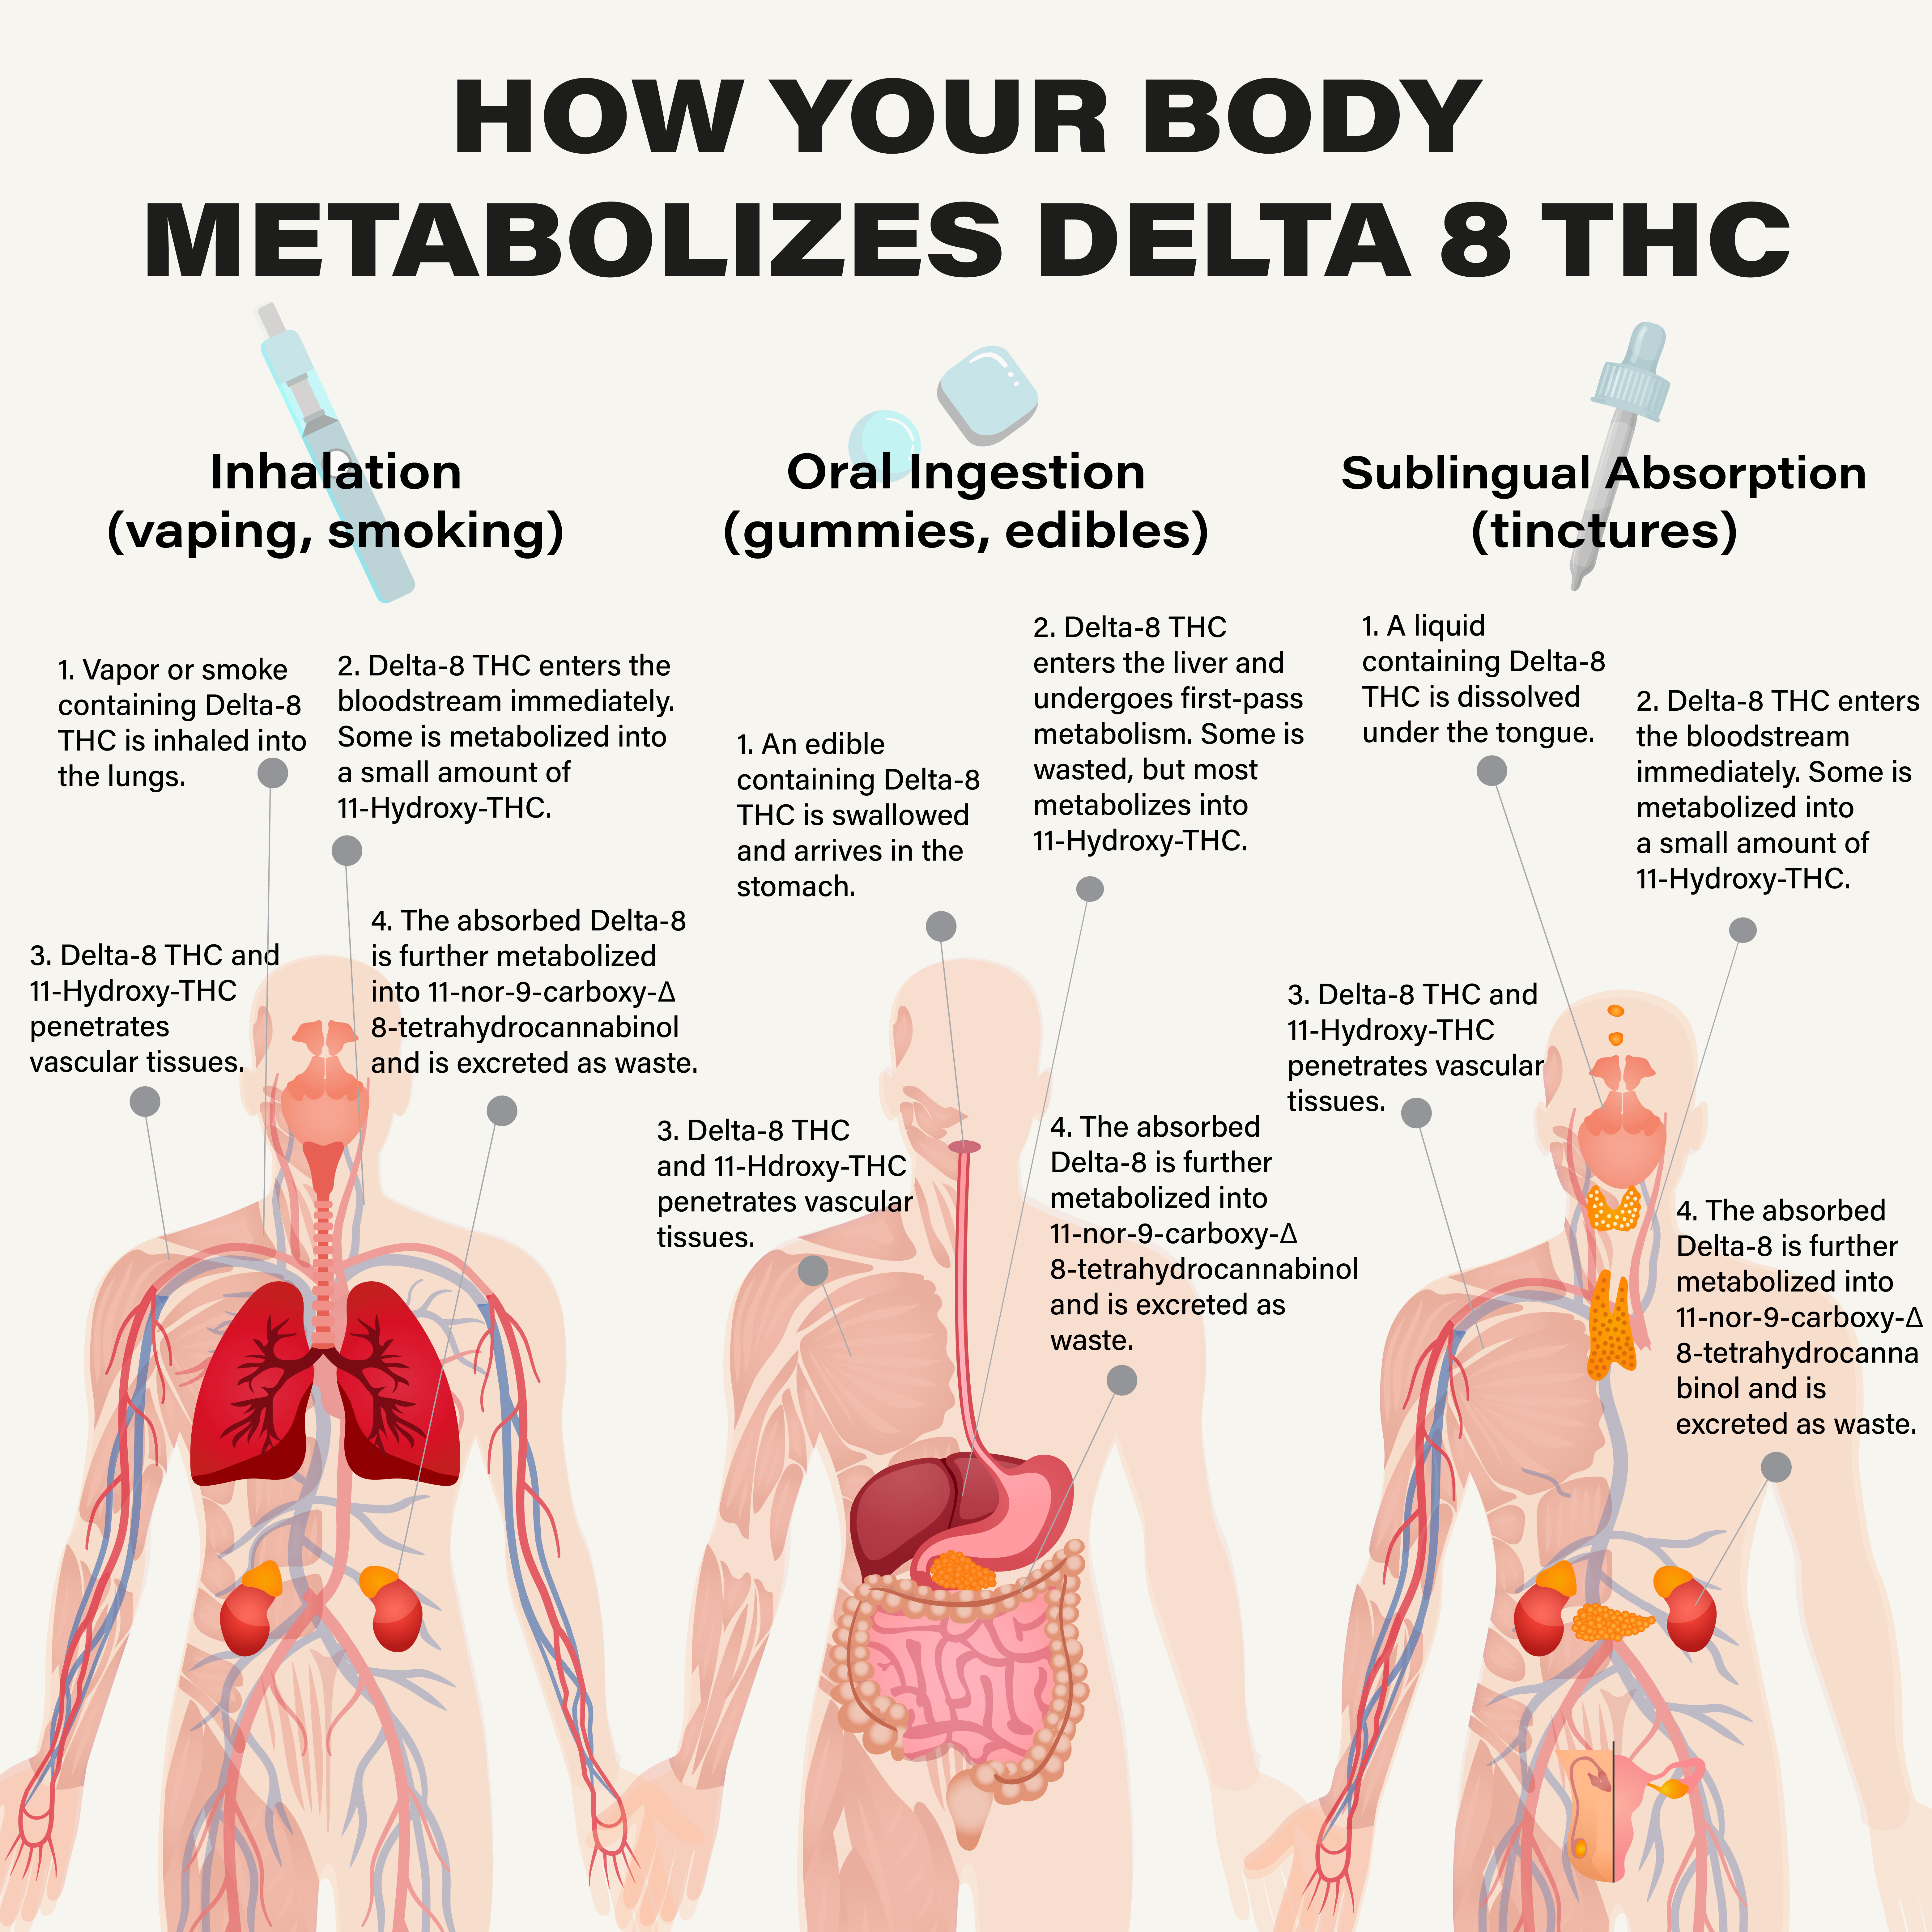 How Your Body Metabolizes Delta 8 Infographic